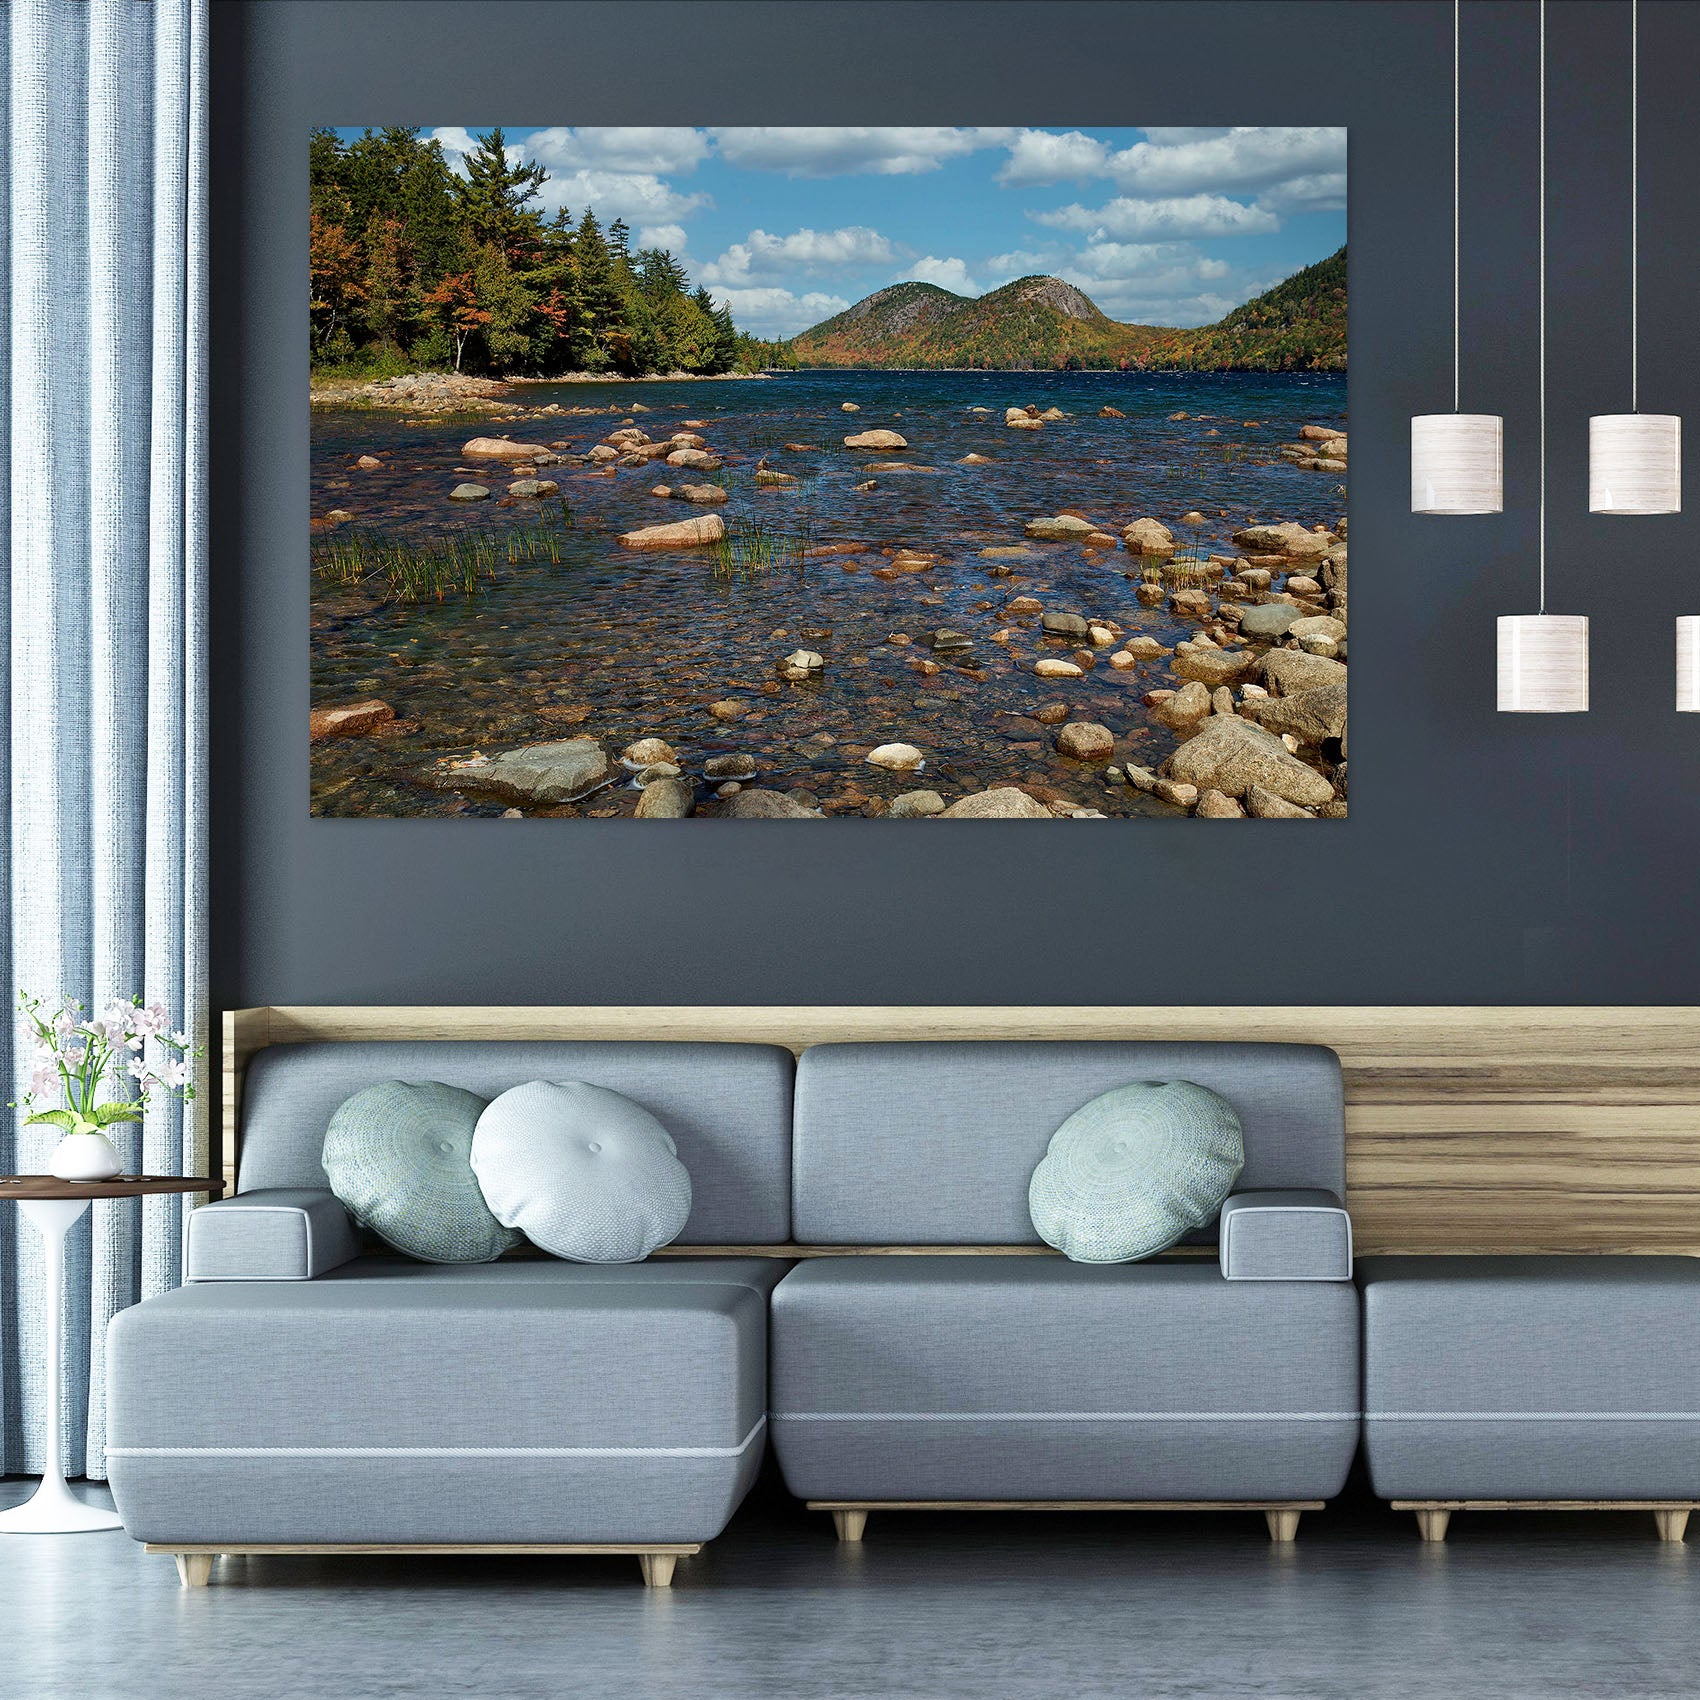 3D Small River Stones 62114 Kathy Barefield Wall Sticker